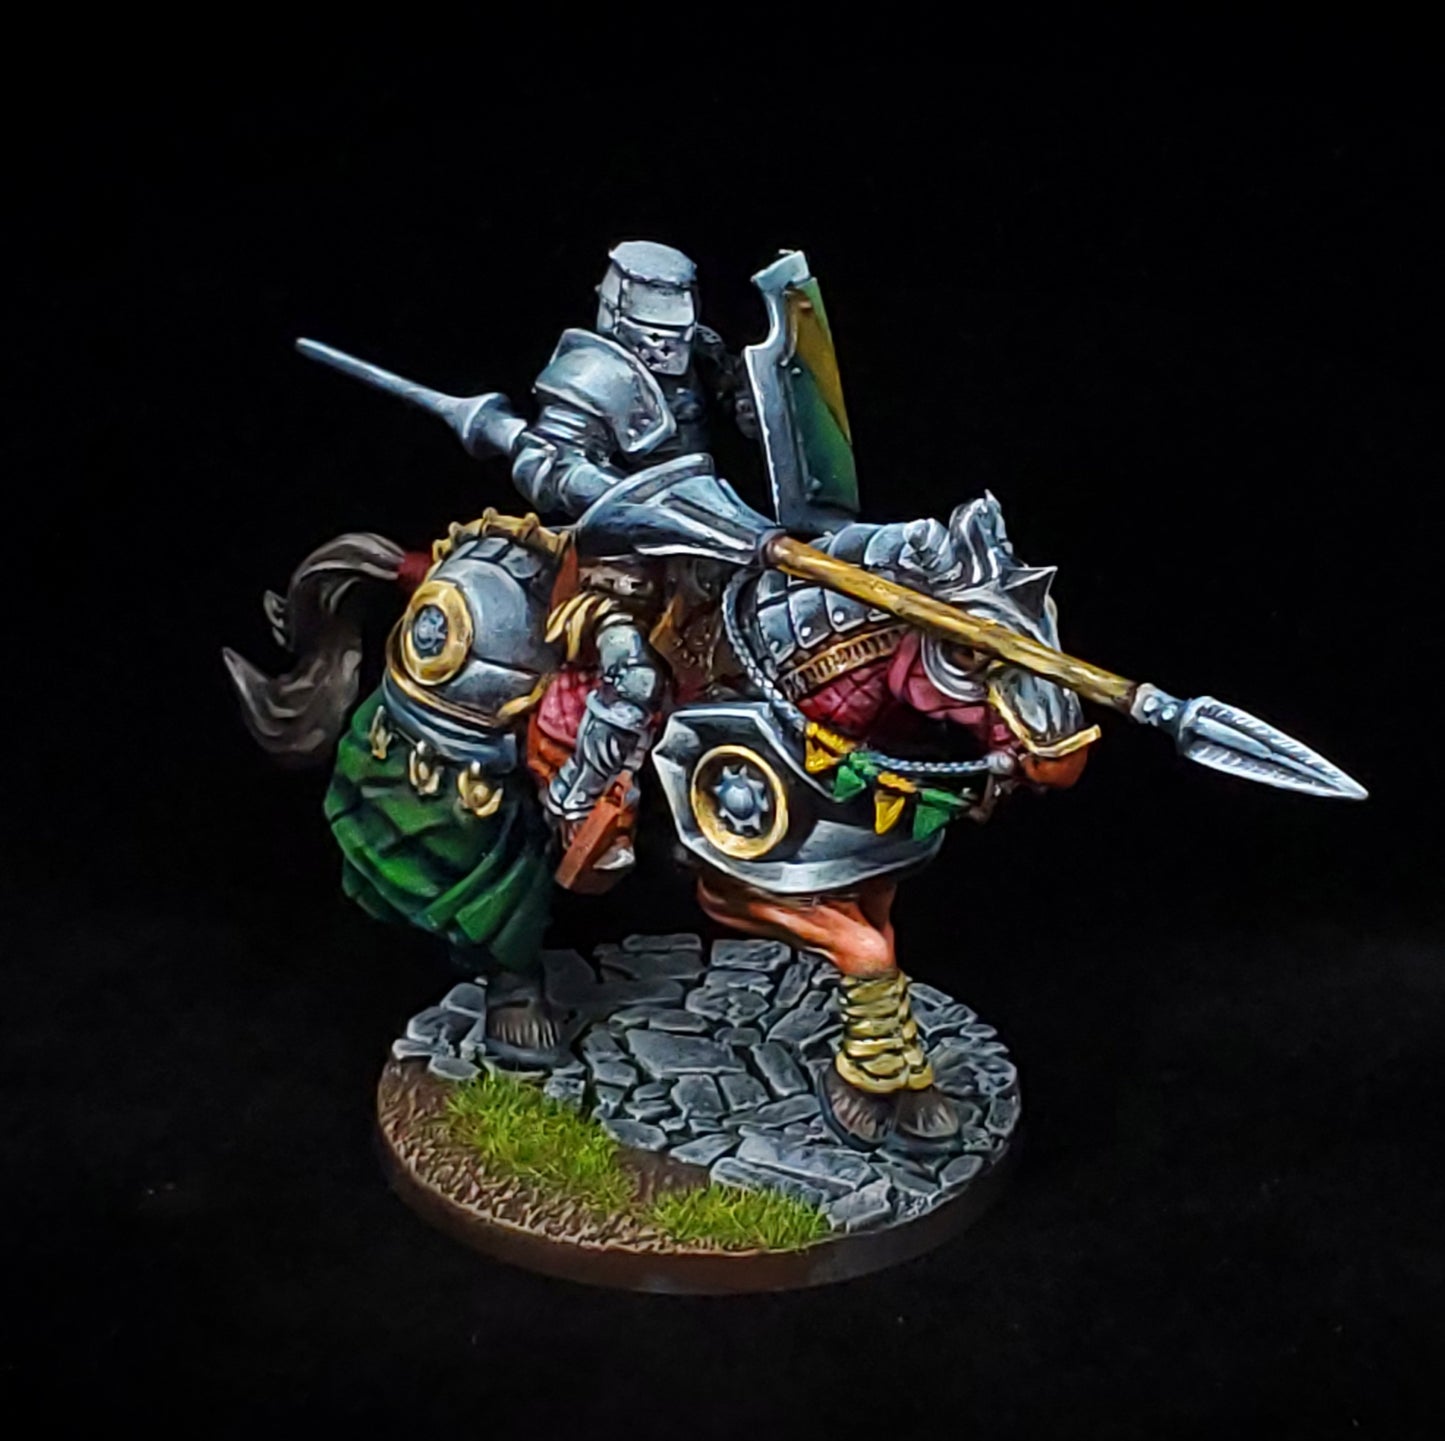 Conversion Bits - Knightly Greathelms (Conquest)